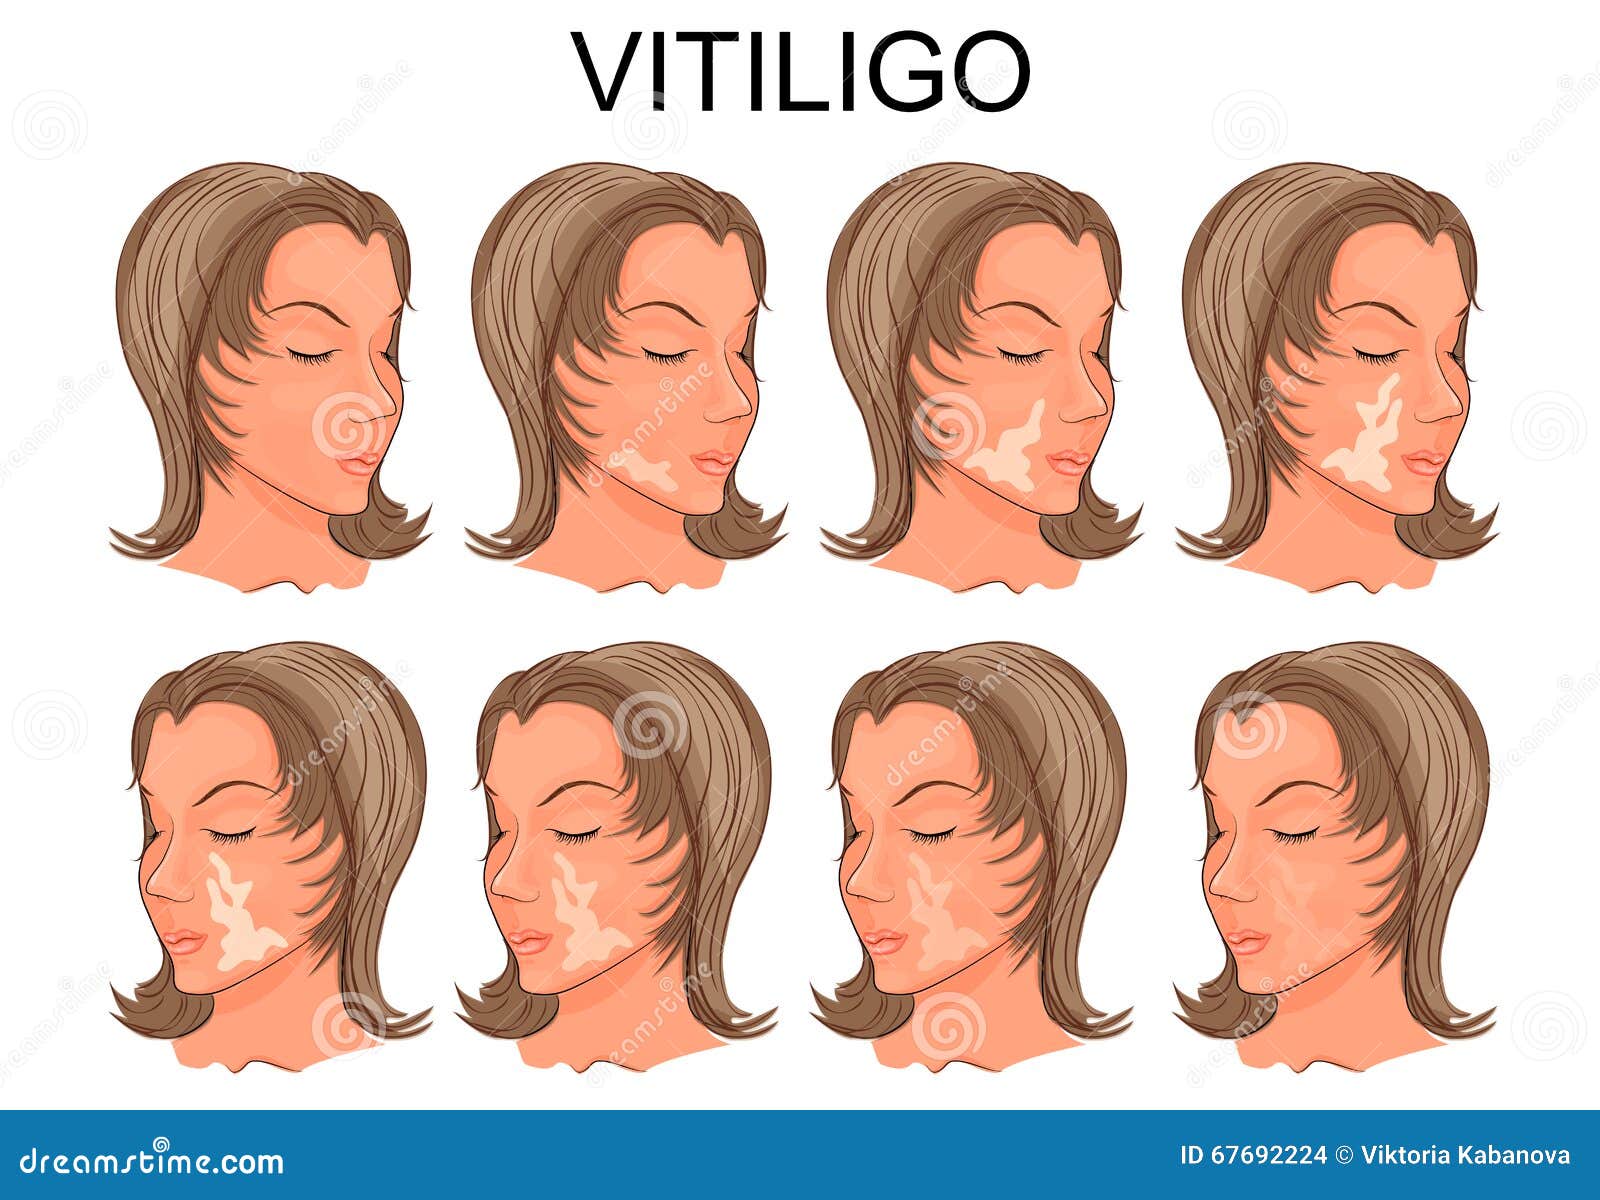 Vitiligo Treatment. Before And After Stock Vector - Image 